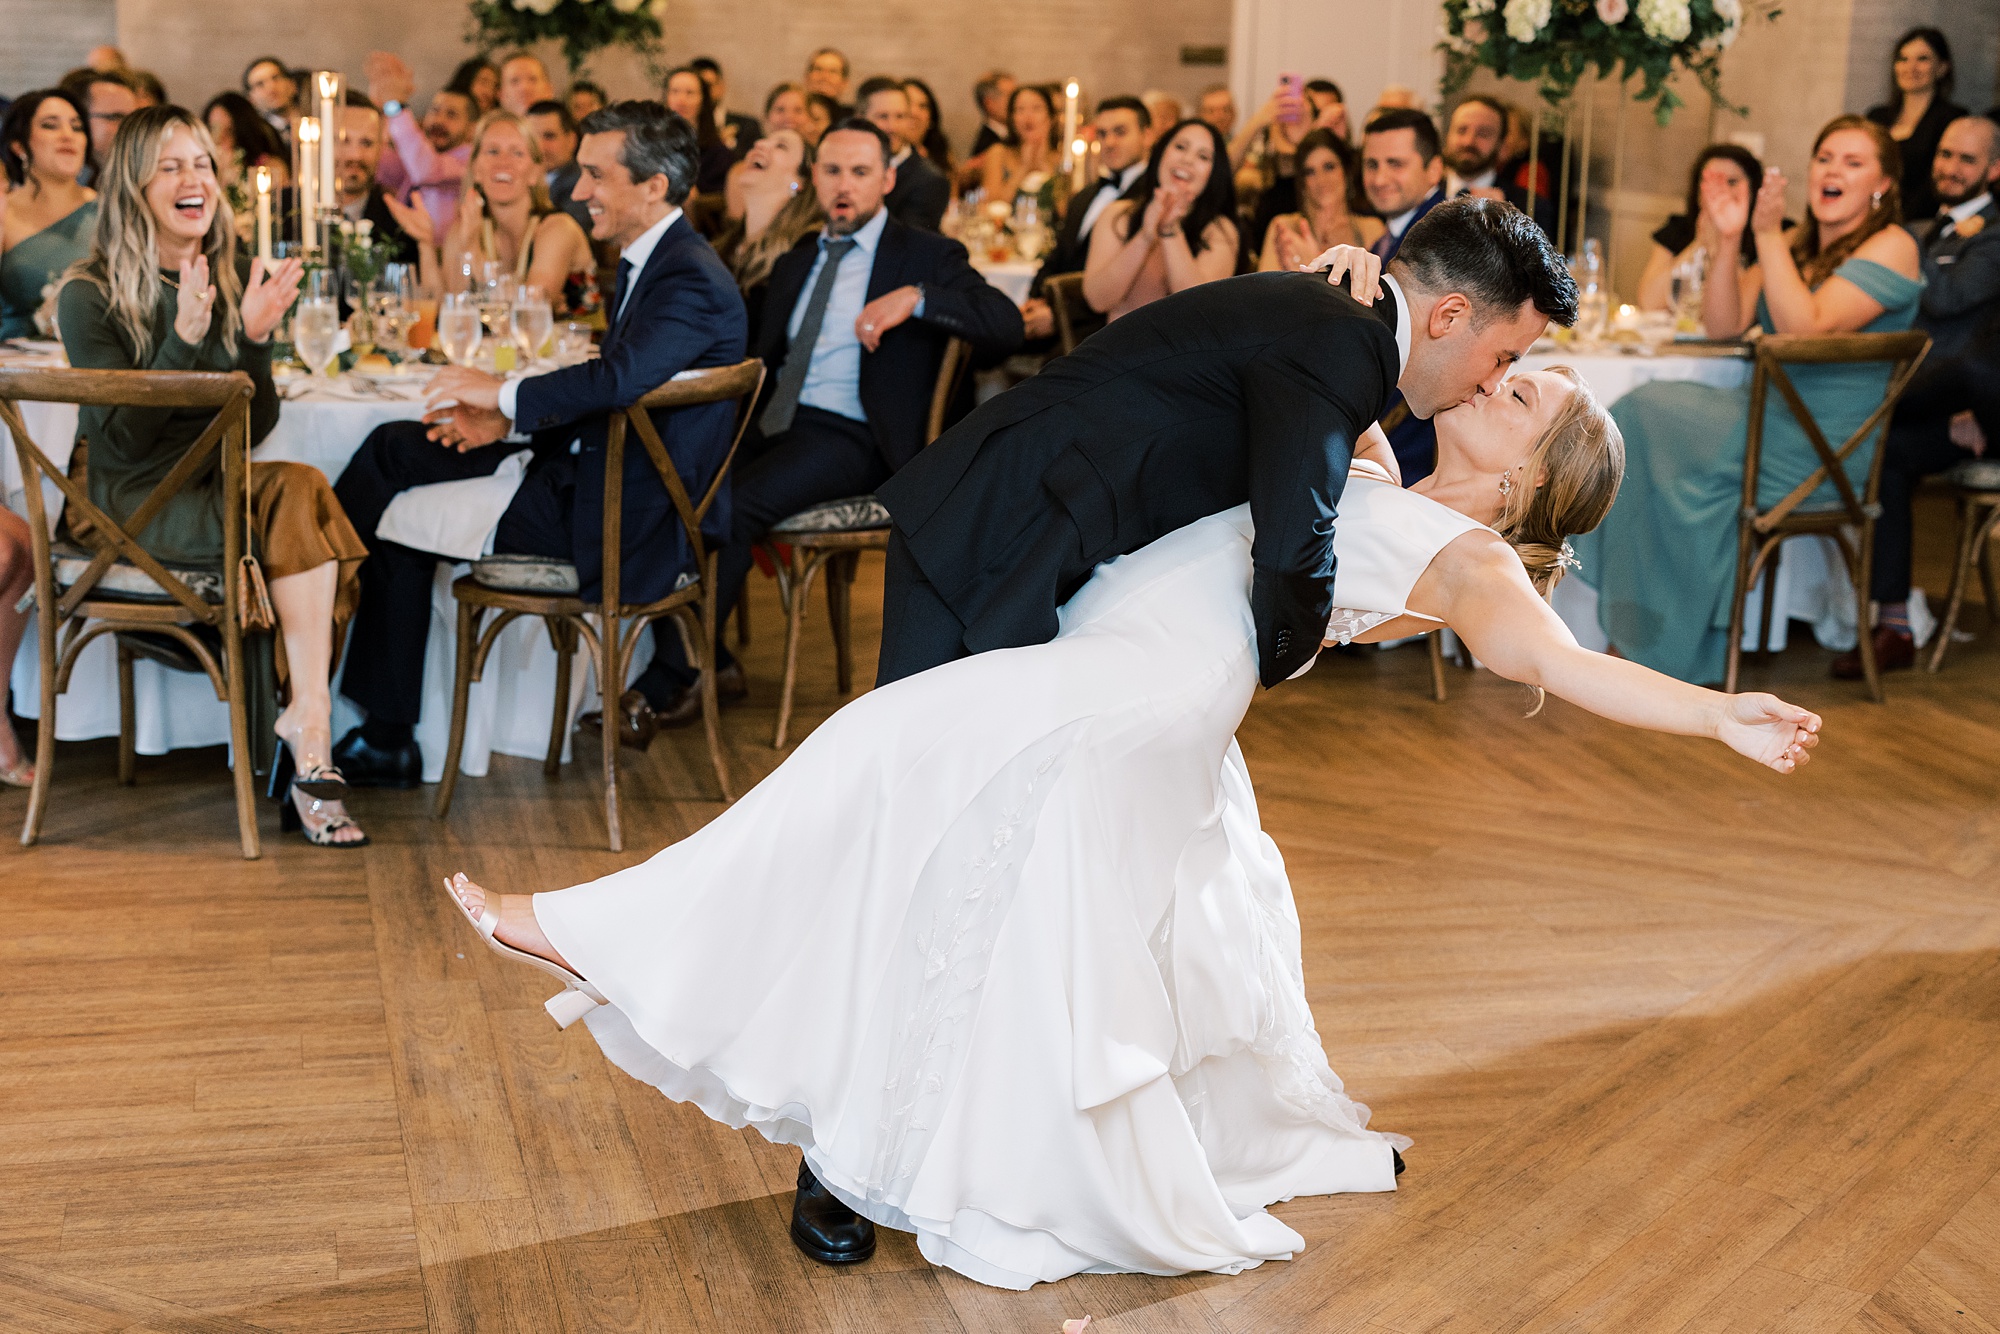 groom dips bride during first dance at New Hope PA wedding reception 